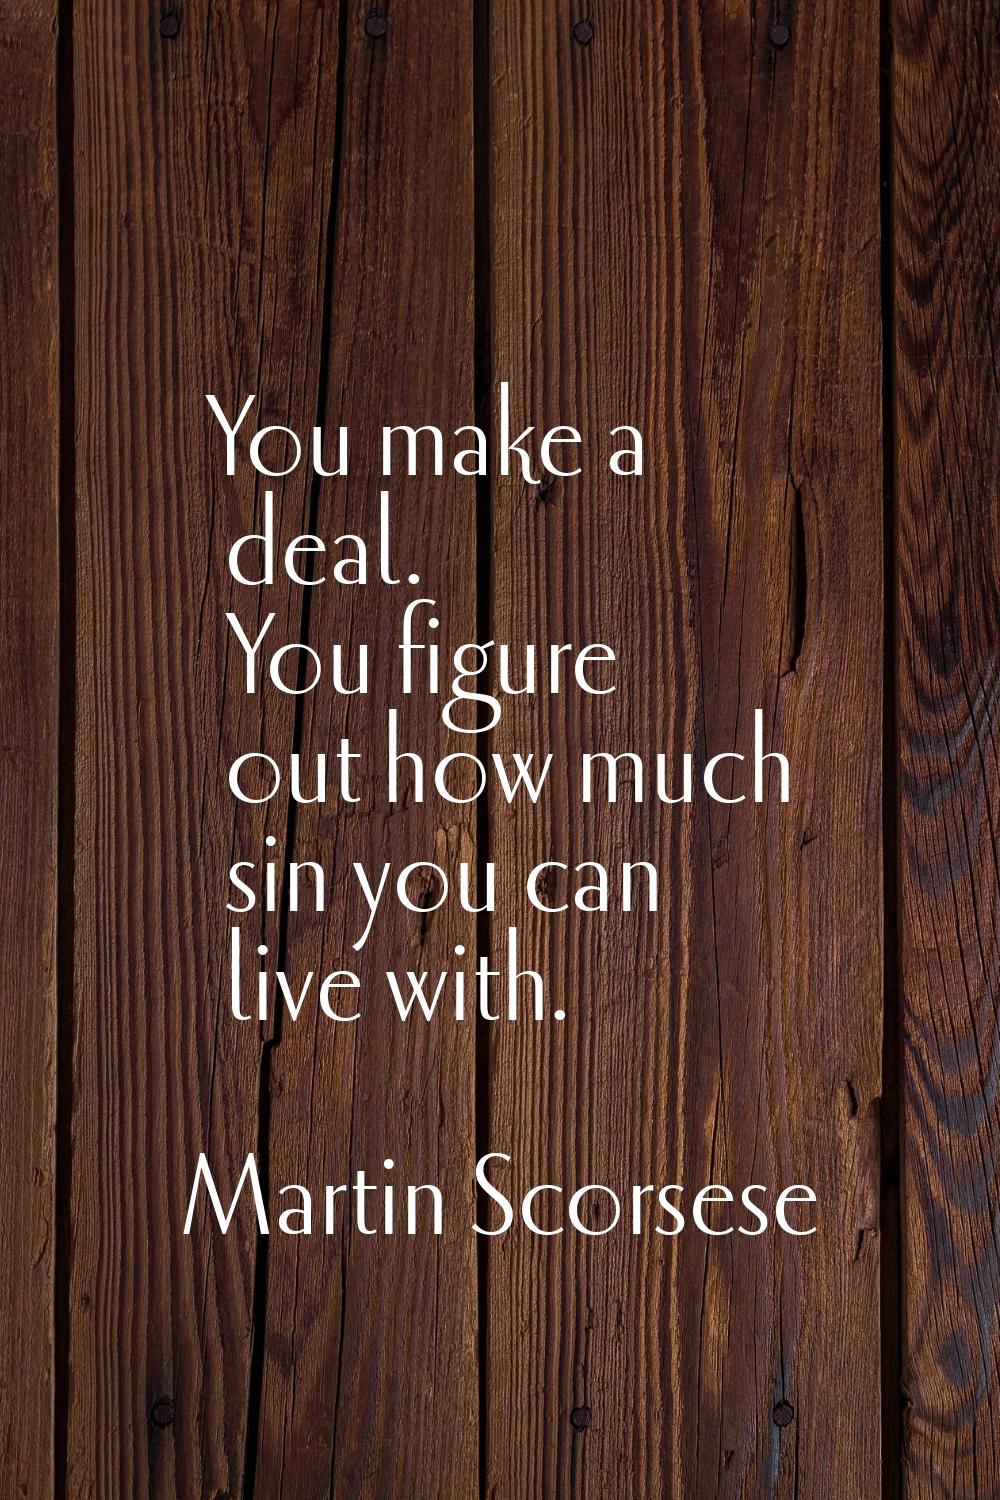 You make a deal. You figure out how much sin you can live with.